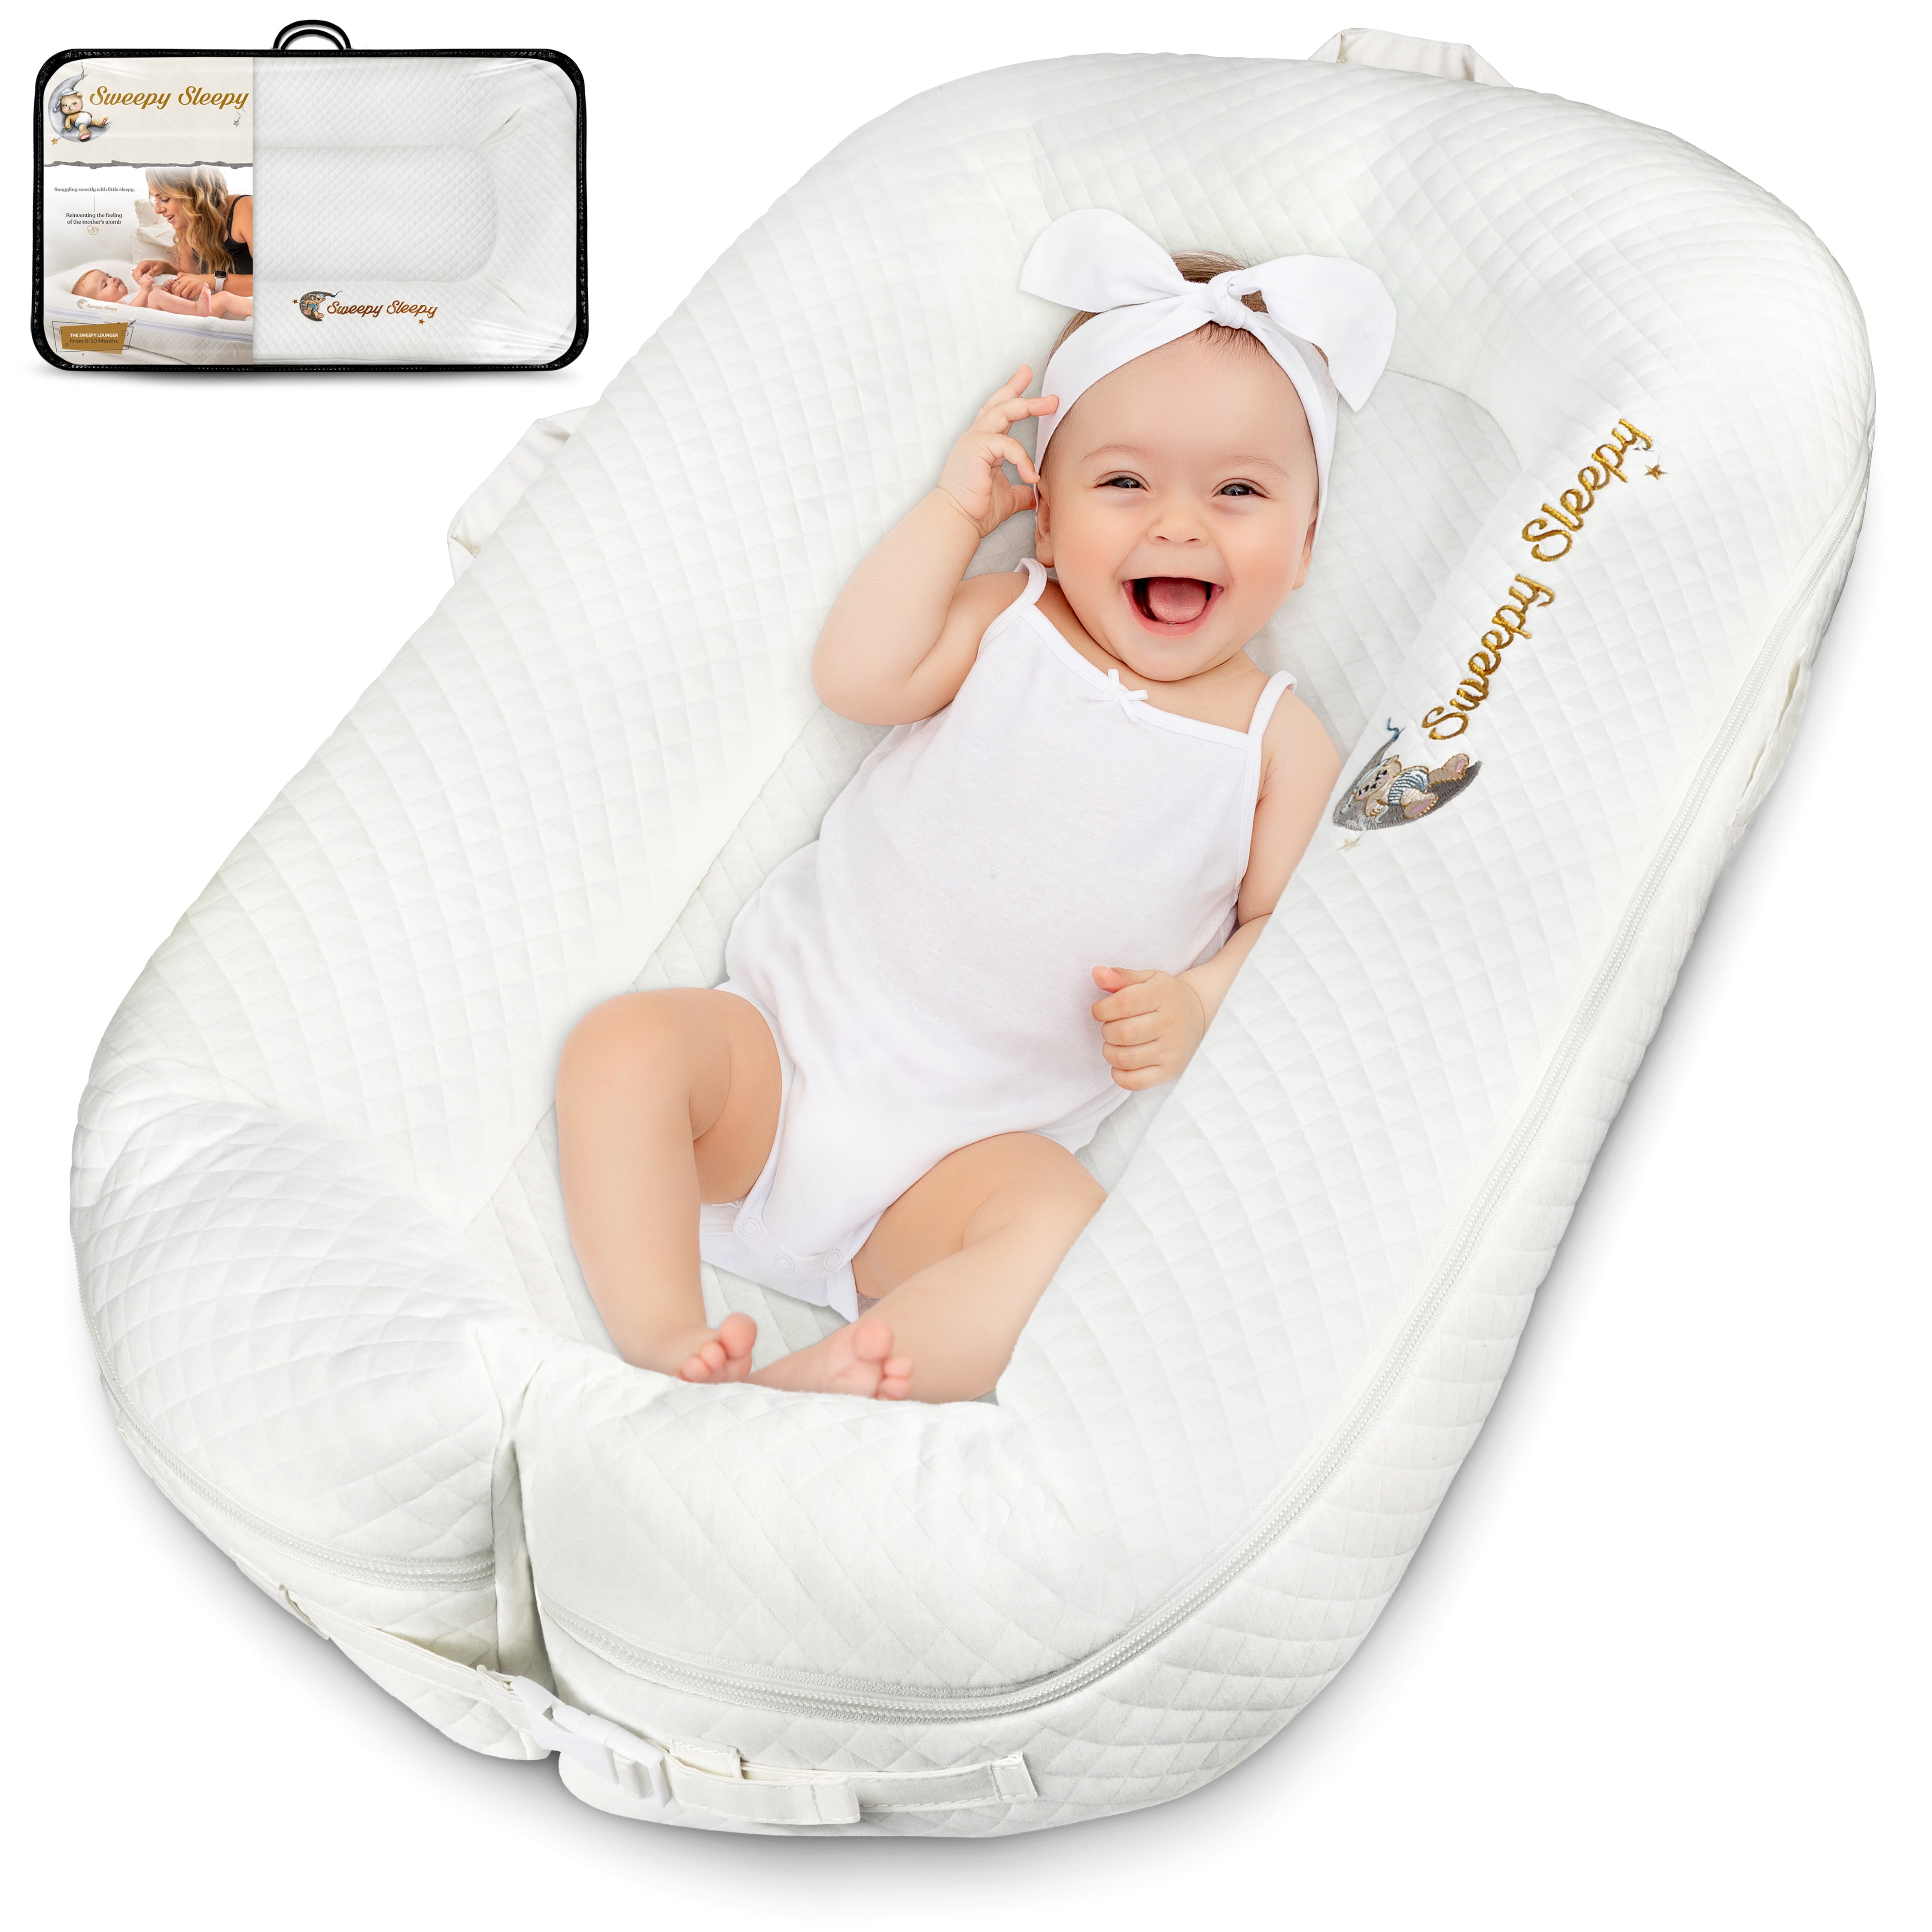 Baby Nest Newborn Crib Co-Sleeping Bed with Pillow 100% Cotton Portable Baby Bassinet Perfect for Traveling and Napping Arrow TOATON Baby Lounger Baby Shower Gift 